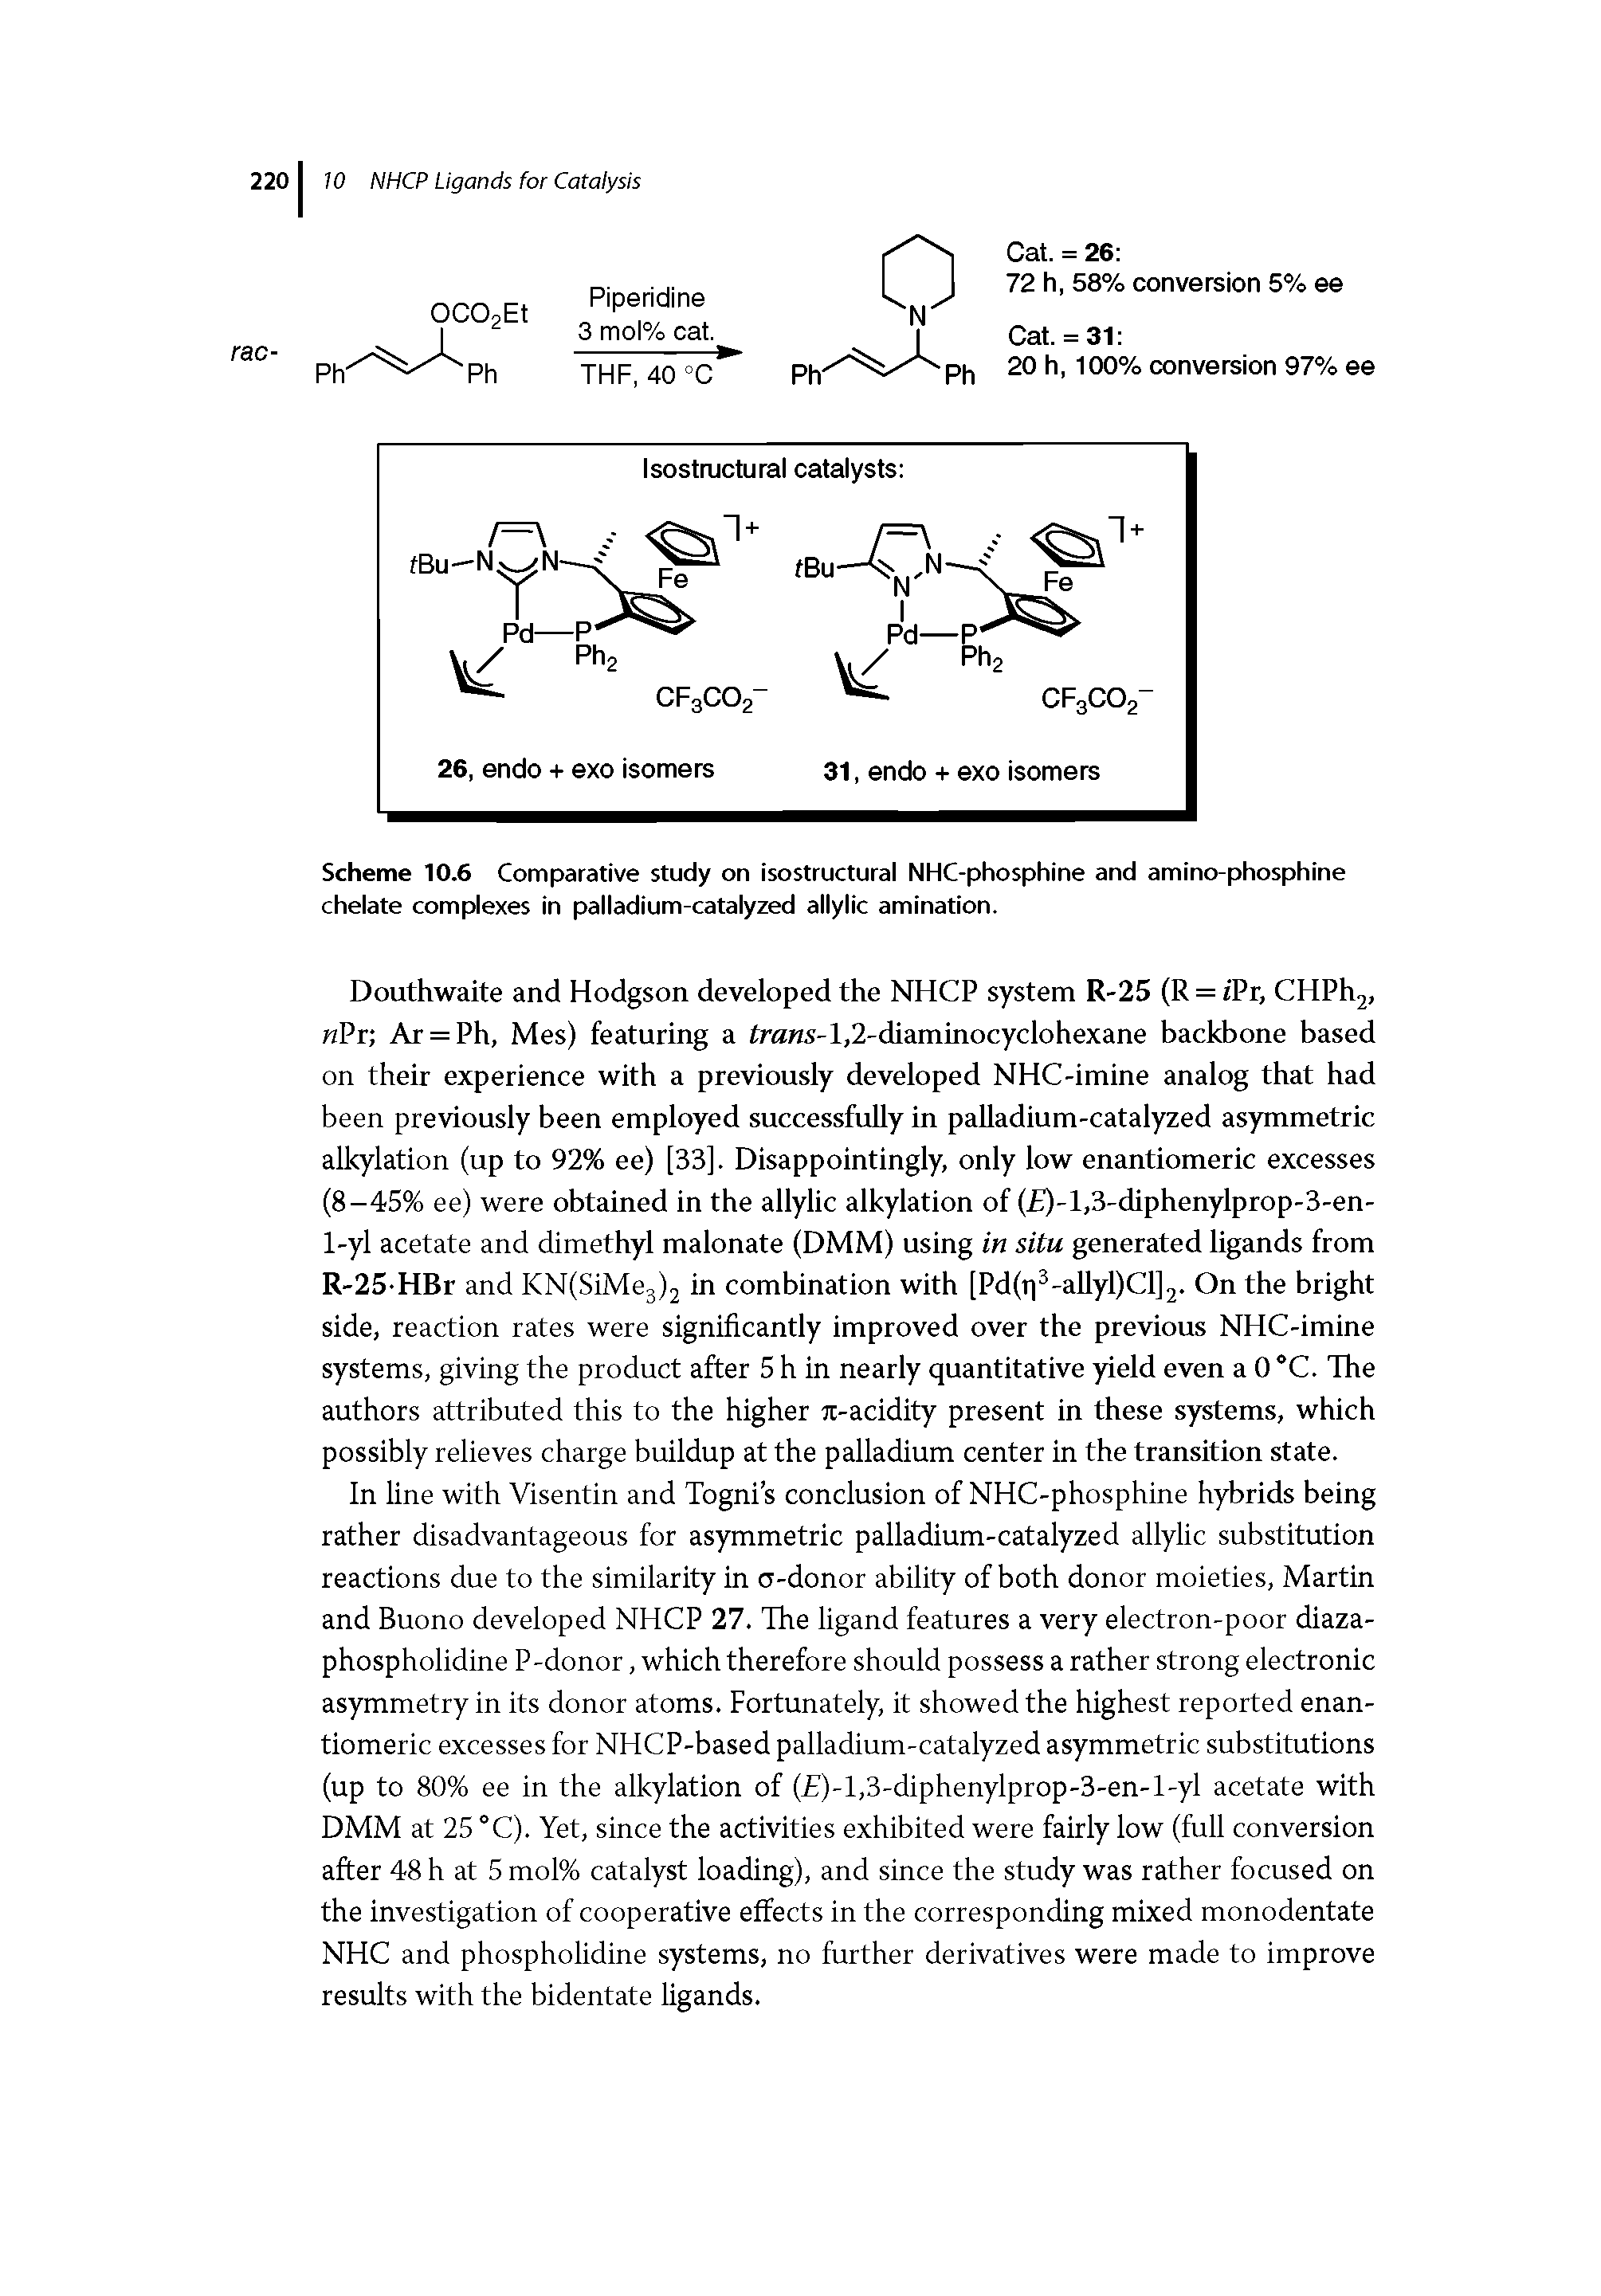 Scheme 10.6 Comparative study on isostructural NHC-phosphine and amino-phosphine chelate complexes in palladium-catalyzed allylic amination.